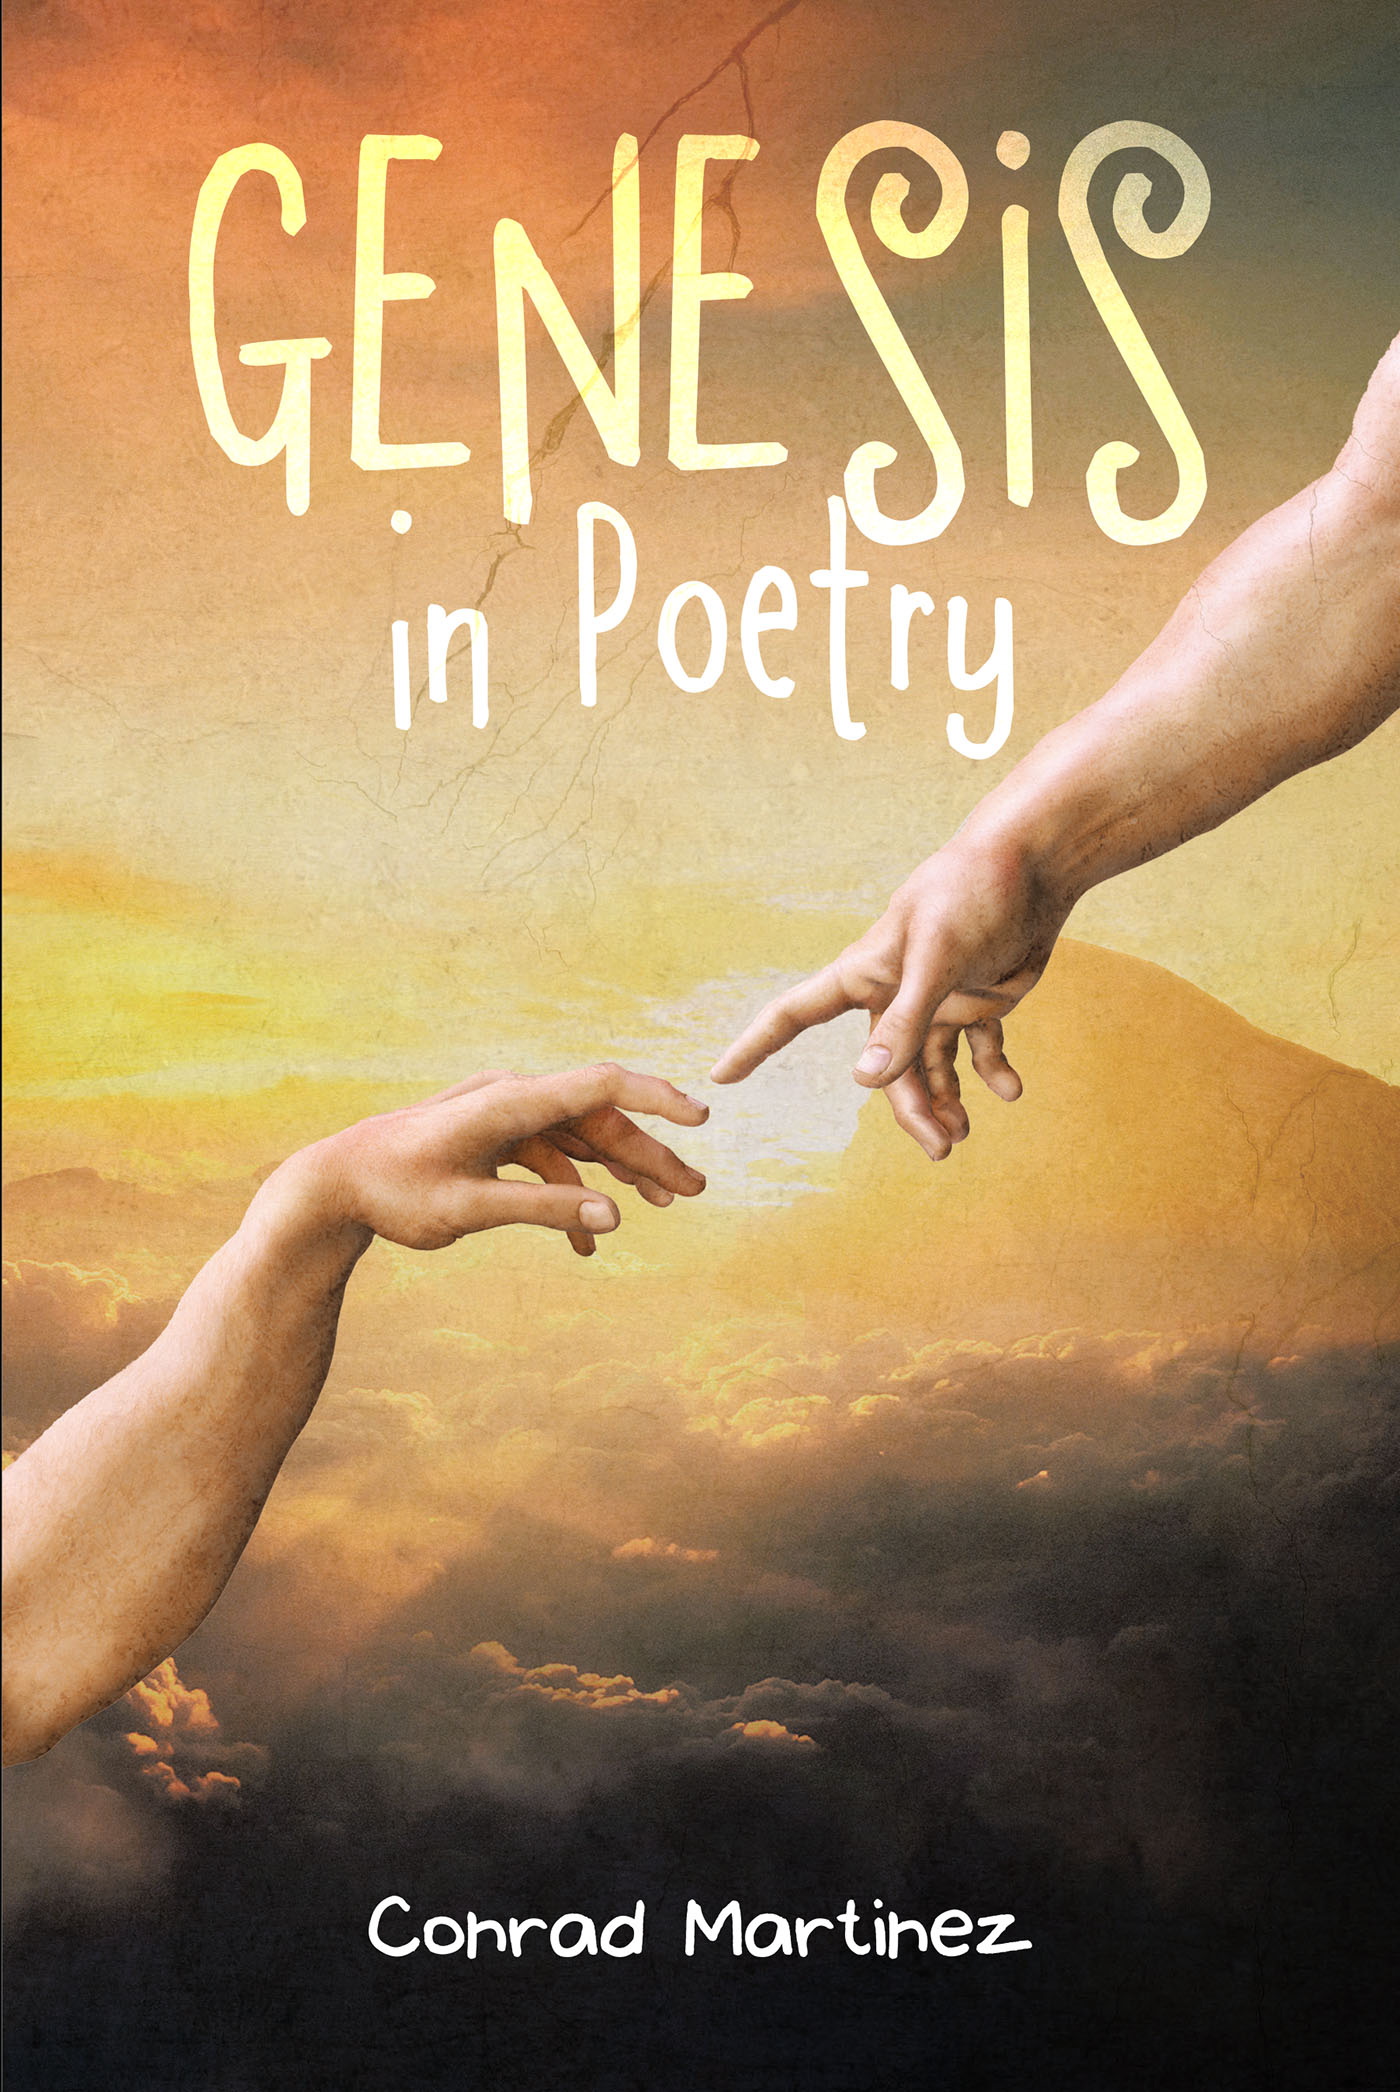 Conrad Martinez’s Newly Released "Genesis in Poetry" is a Creative Interpretation of Genesis That Brings Together God’s Word in Poetic Narrative